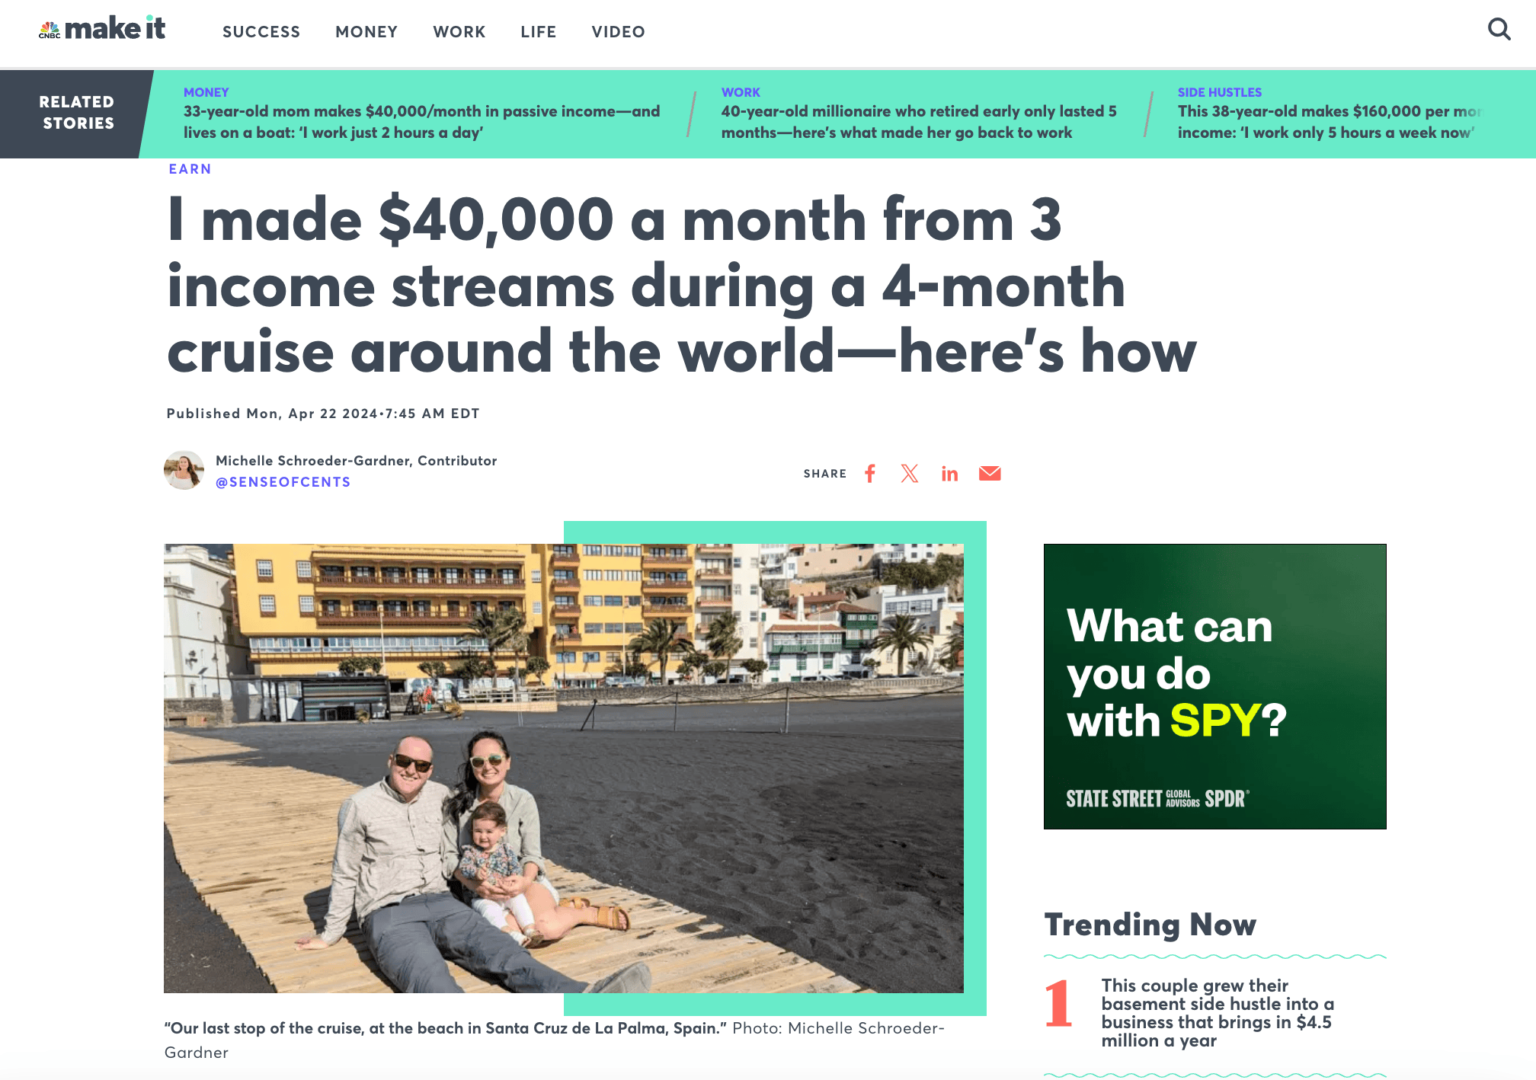 I made $40,000 a month from 3 income streams during a 4-month cruise around the world—here’s how